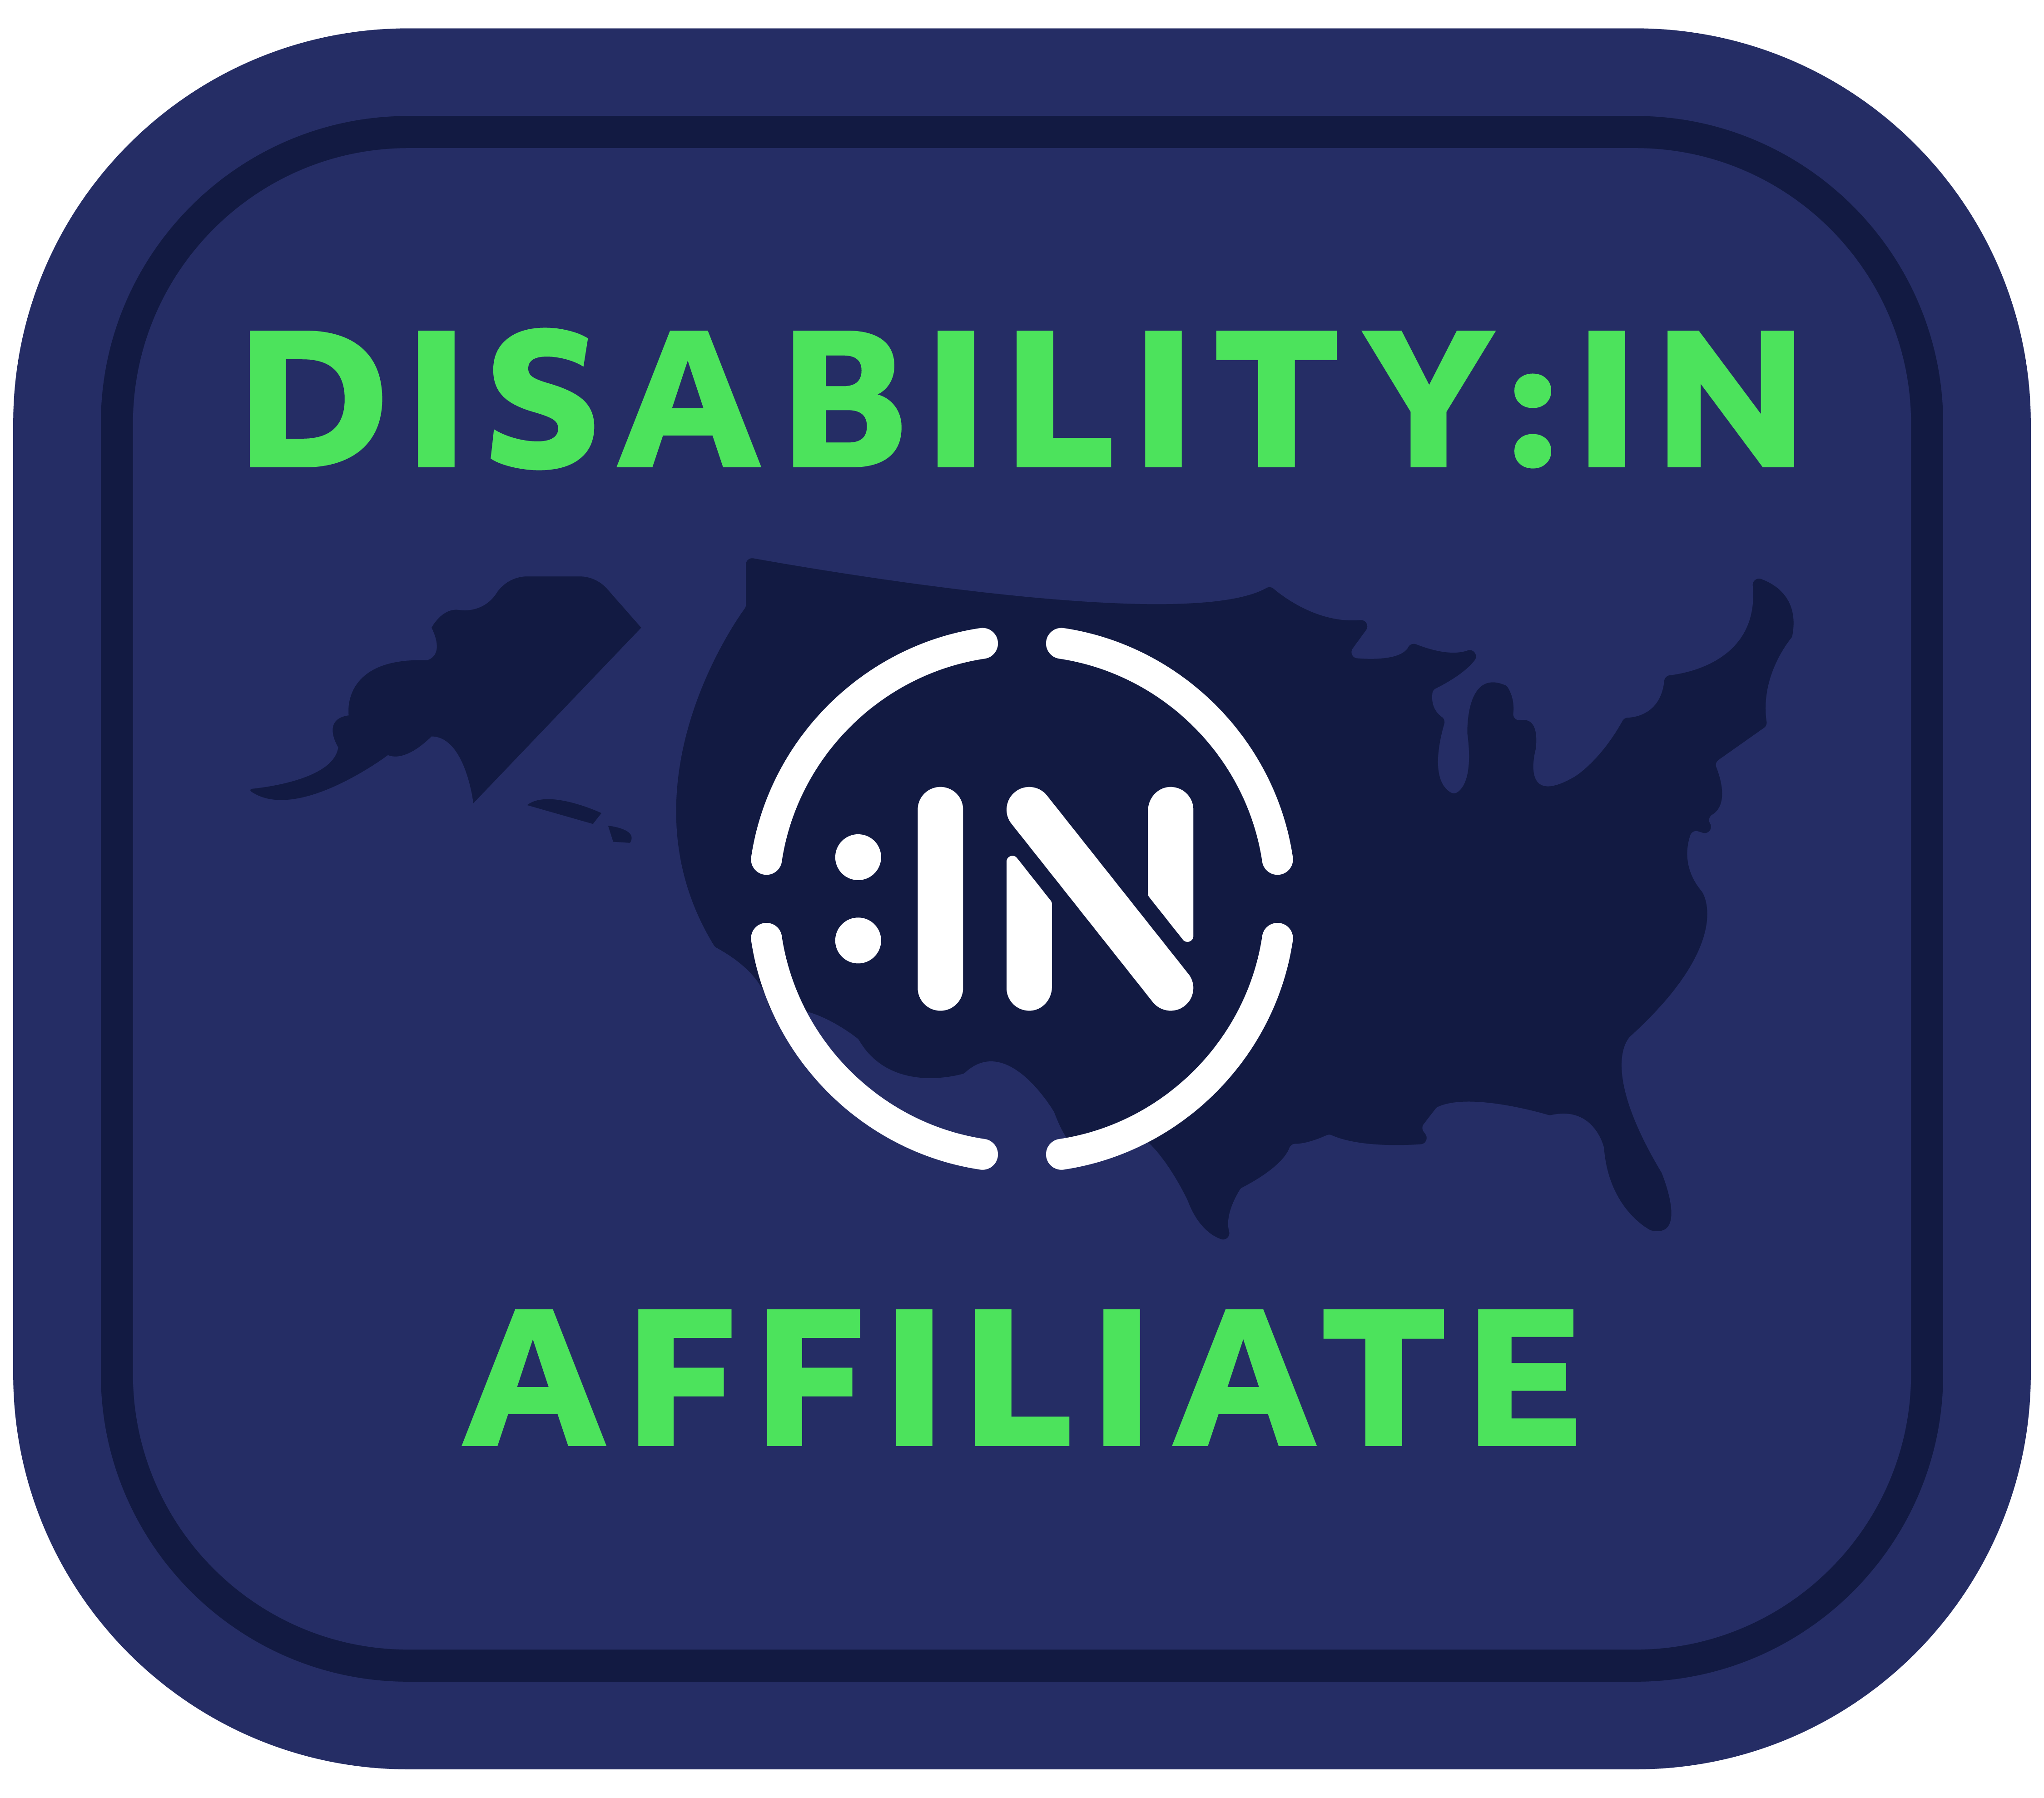 Disability:IN Affiliate with United States background.